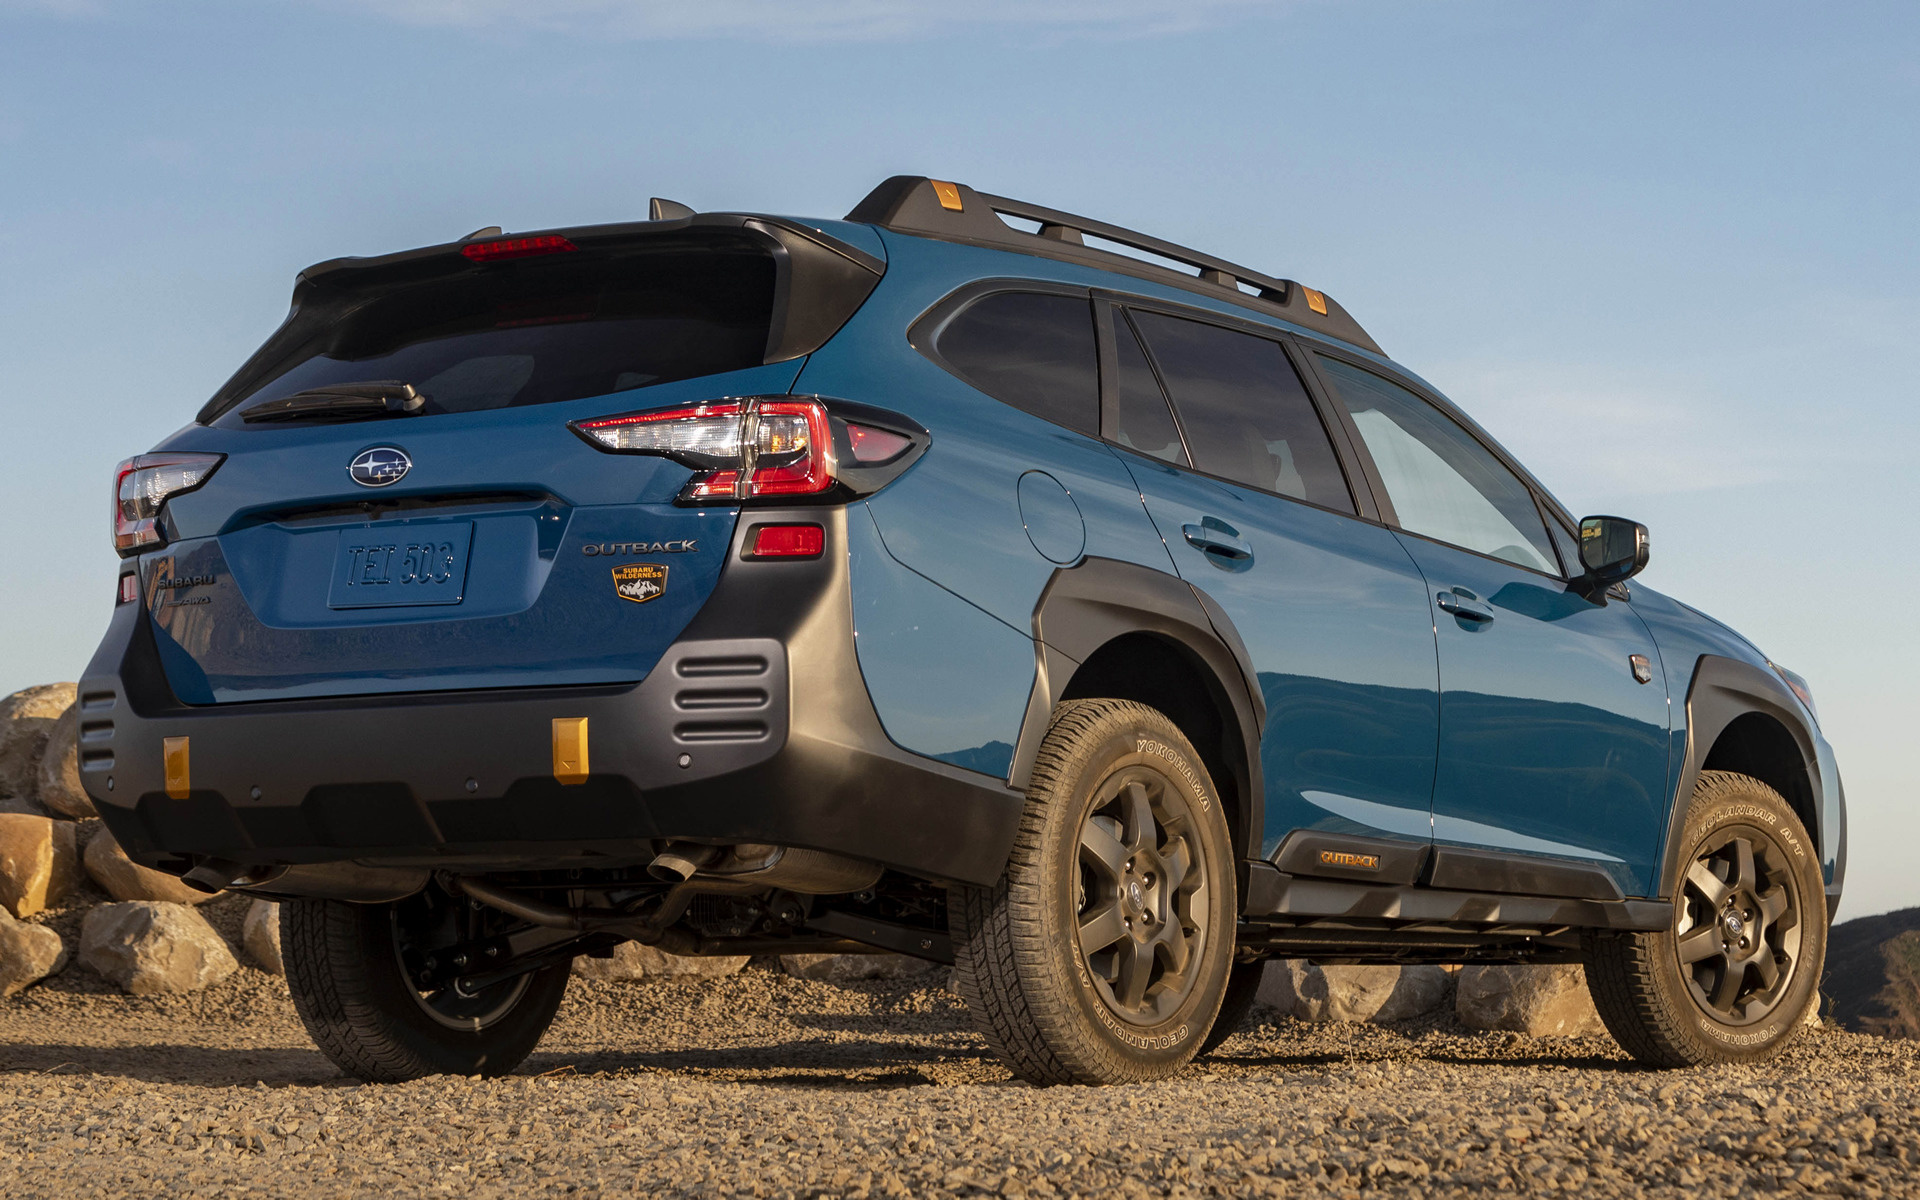 Subaru Outback, Wilderness edition, Off-road prowess, Enhanced features, 1920x1200 HD Desktop